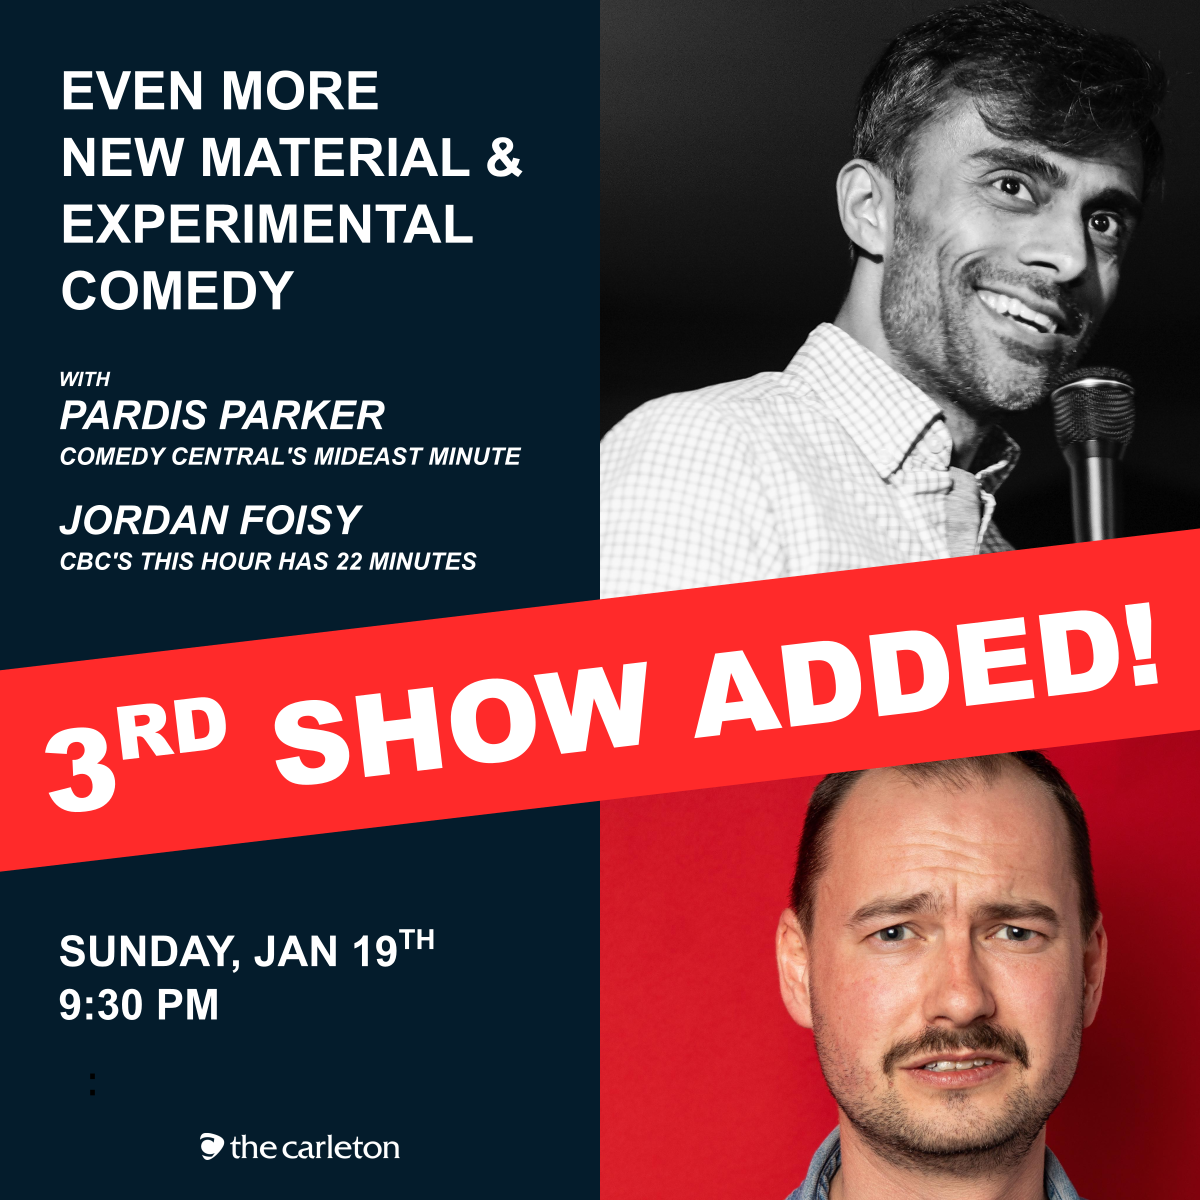 CANCELLED: Even More Comedy At The Carleton - 3rd Show!!! - Pardis ...